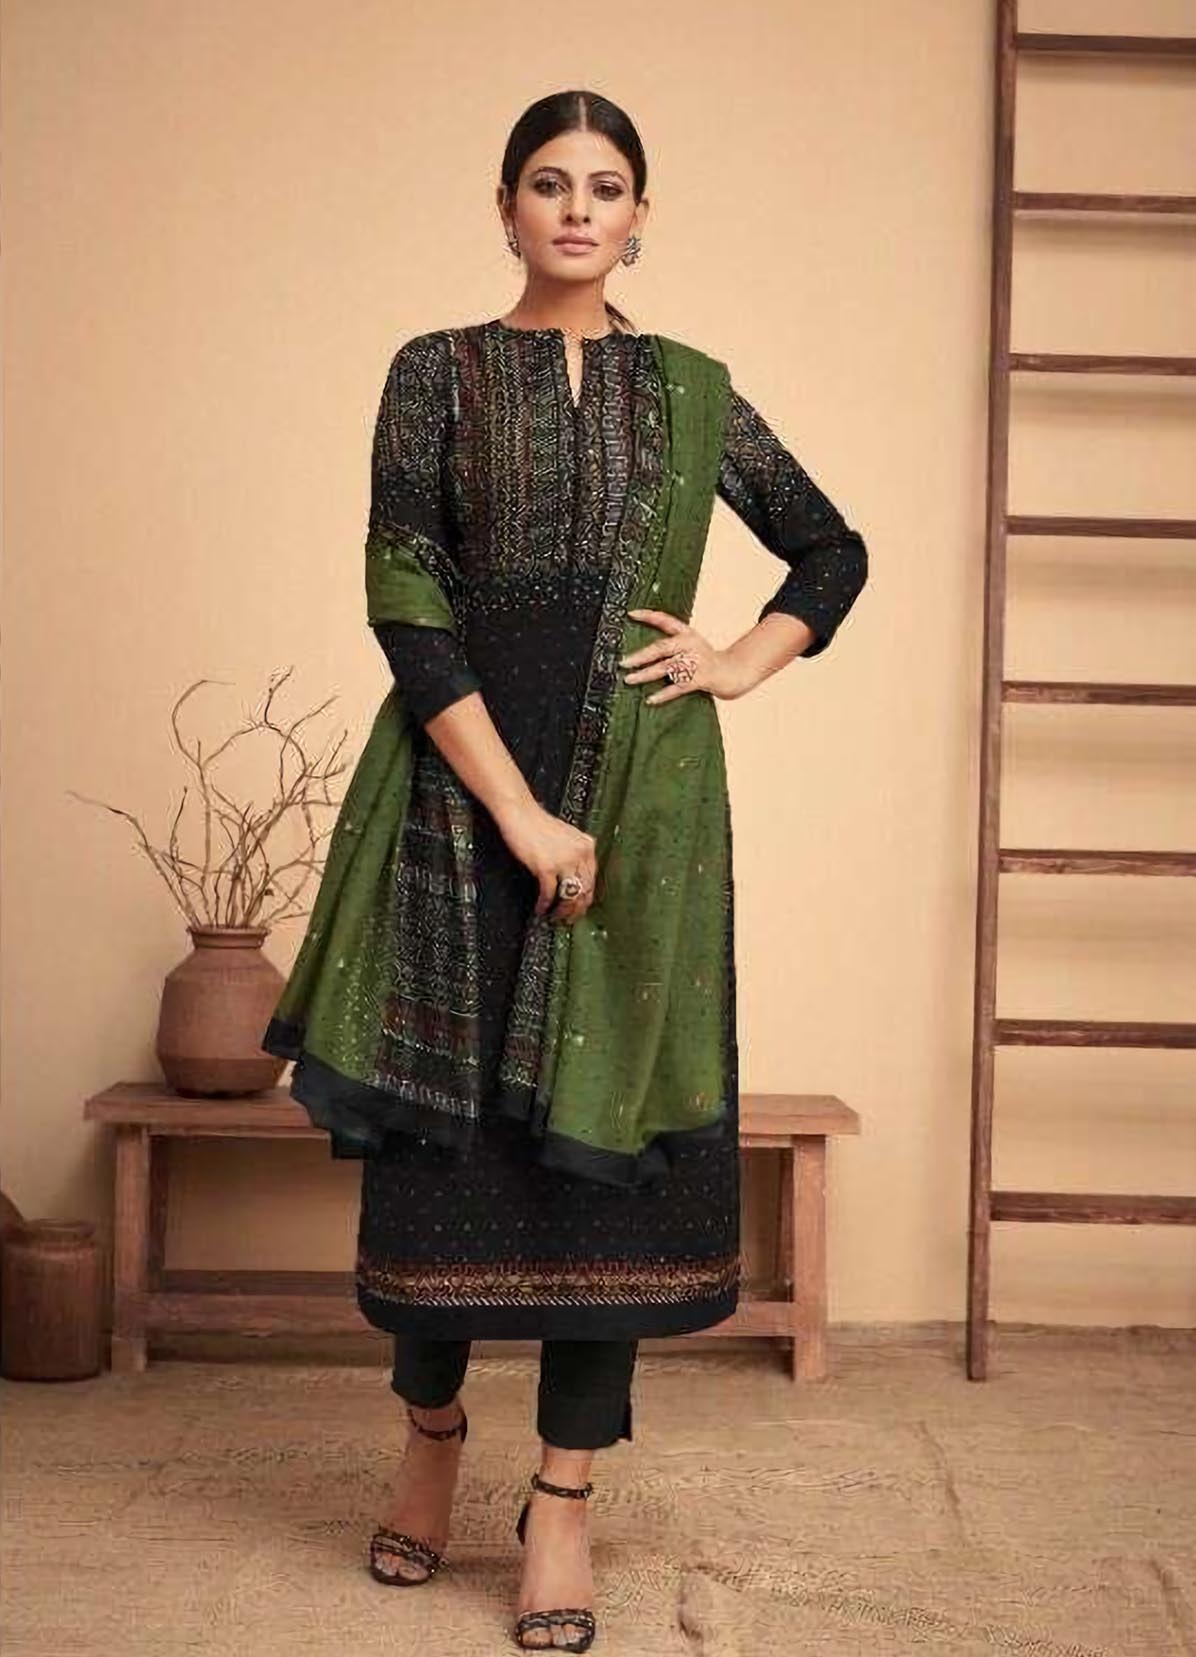 Printed Cotton Satin Unstitched Suits With Mirror Work For Women - Stilento